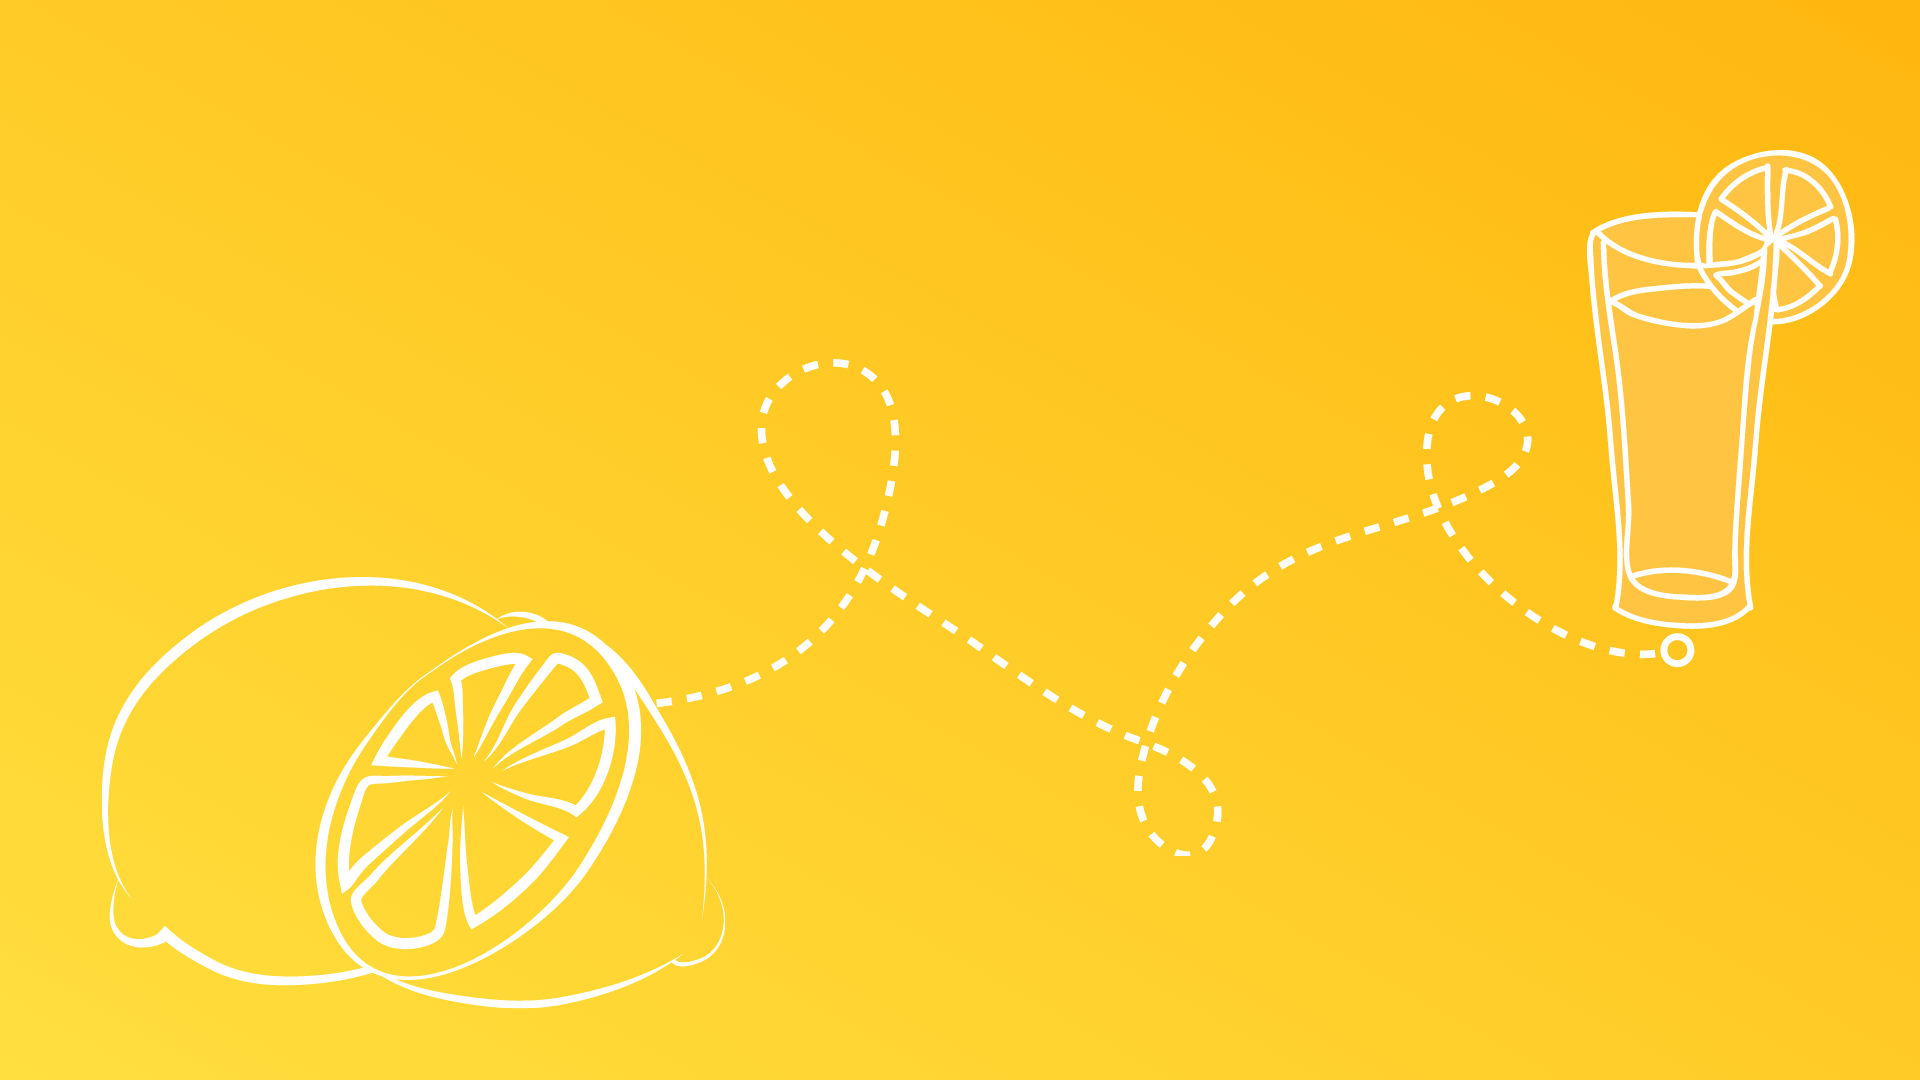 If life hands you lemons, don’t assume you know how to make lemonade | Savvy Cooperative | #AskPatients